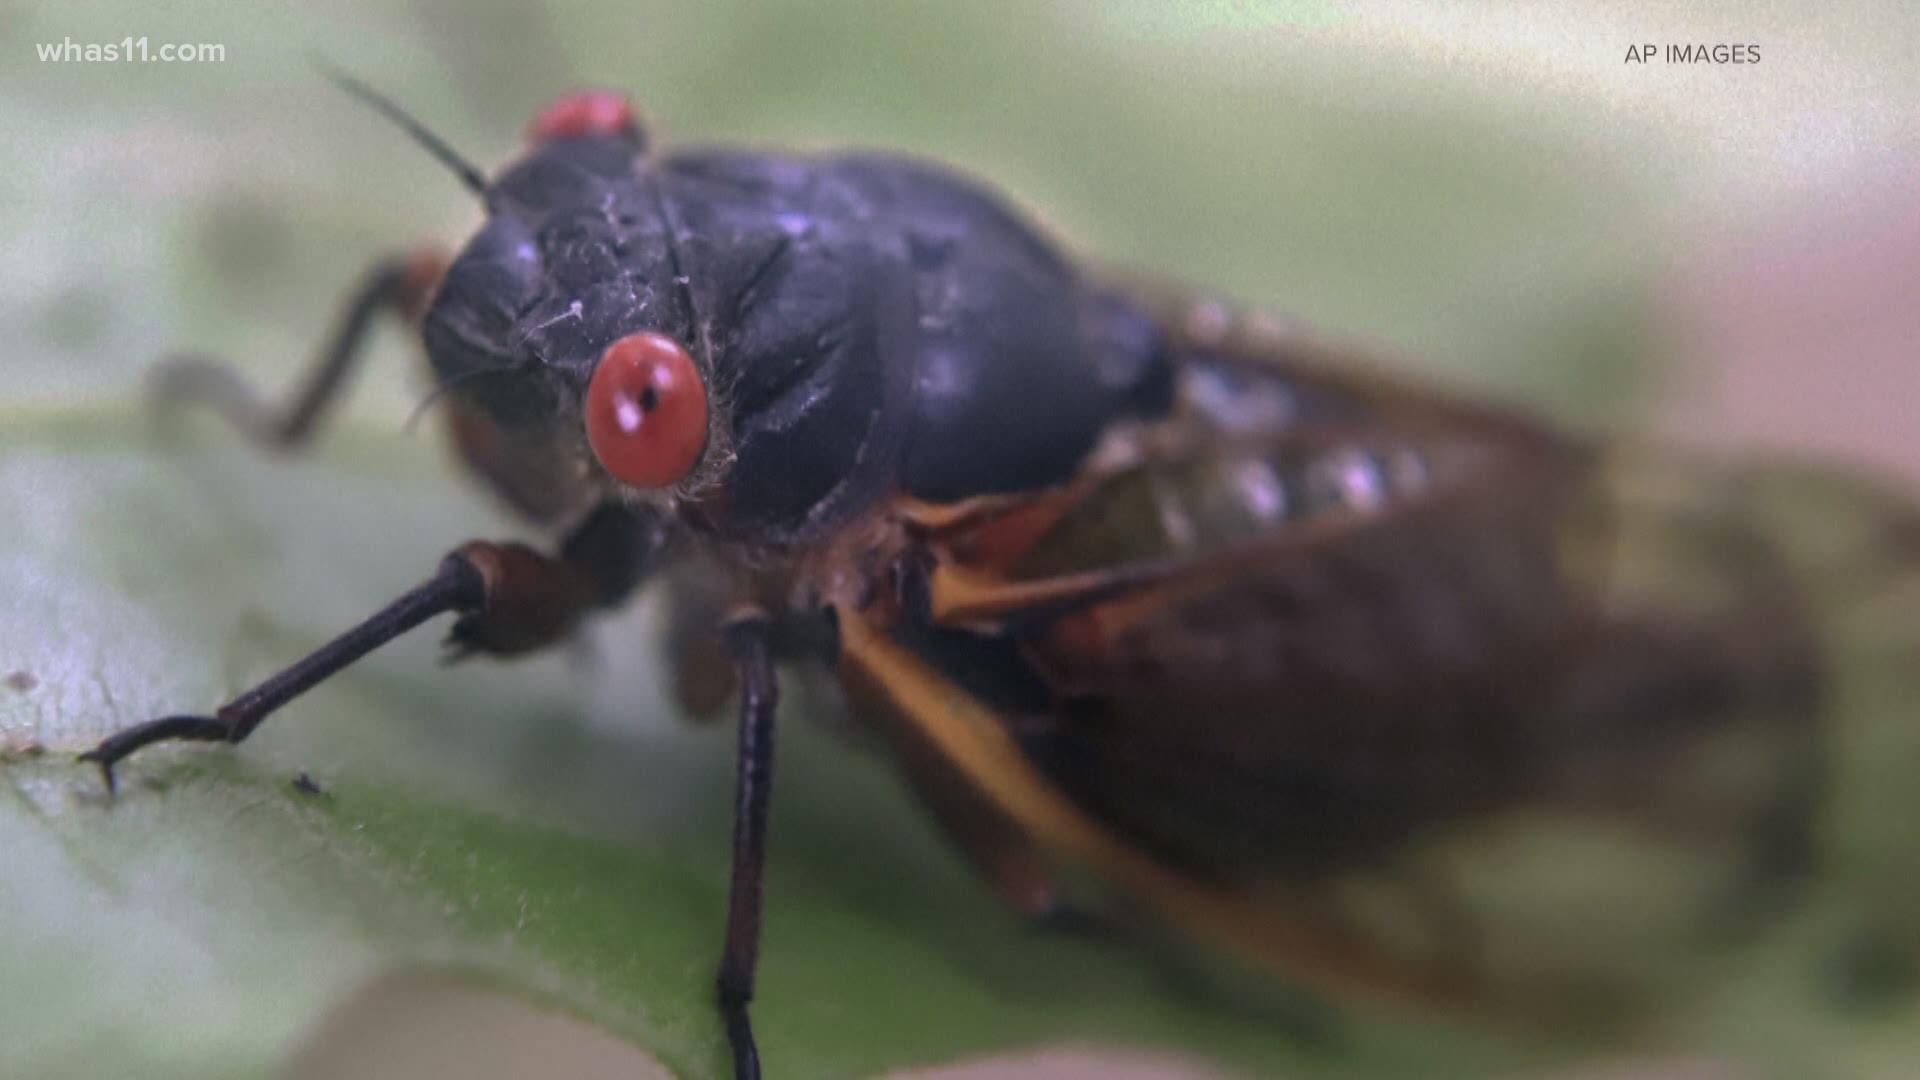 After a 17-year wait, the cicadas are ready to come out and play. A local bug expert shares what you can expect.